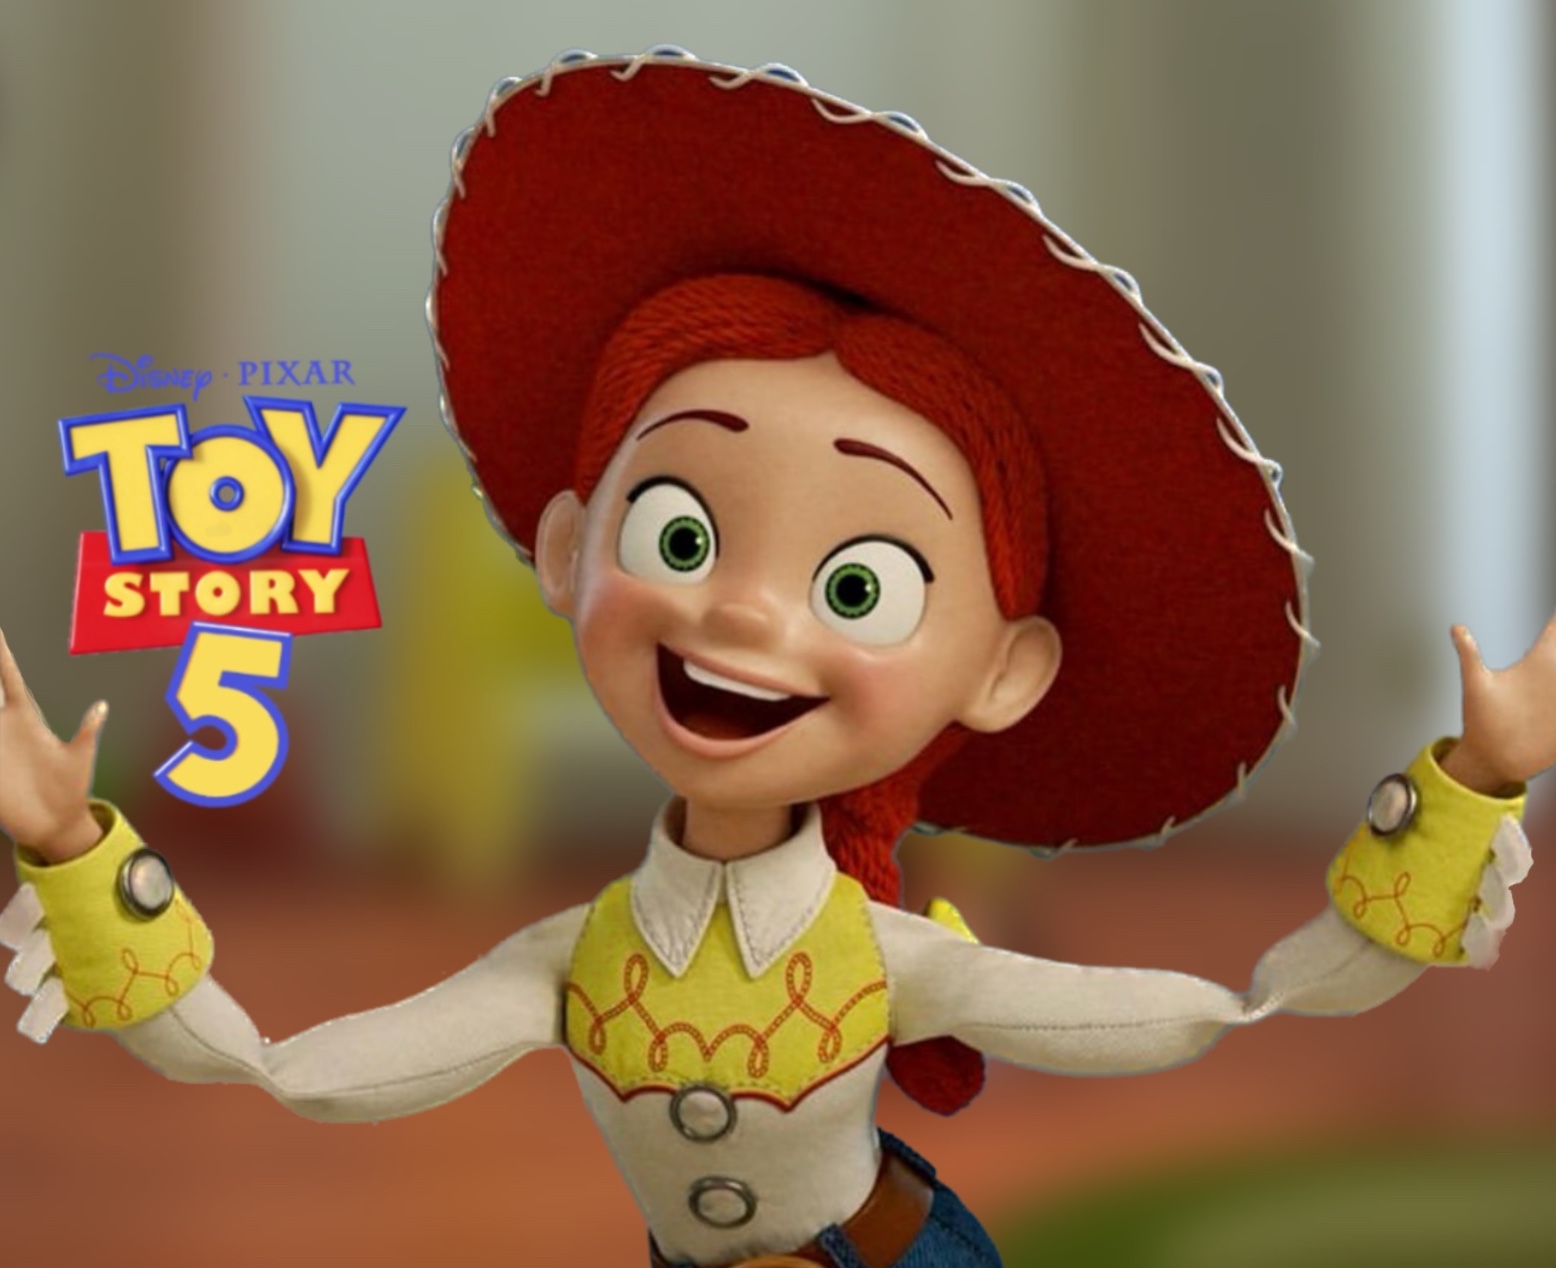 Will We Get Toy Story 5?